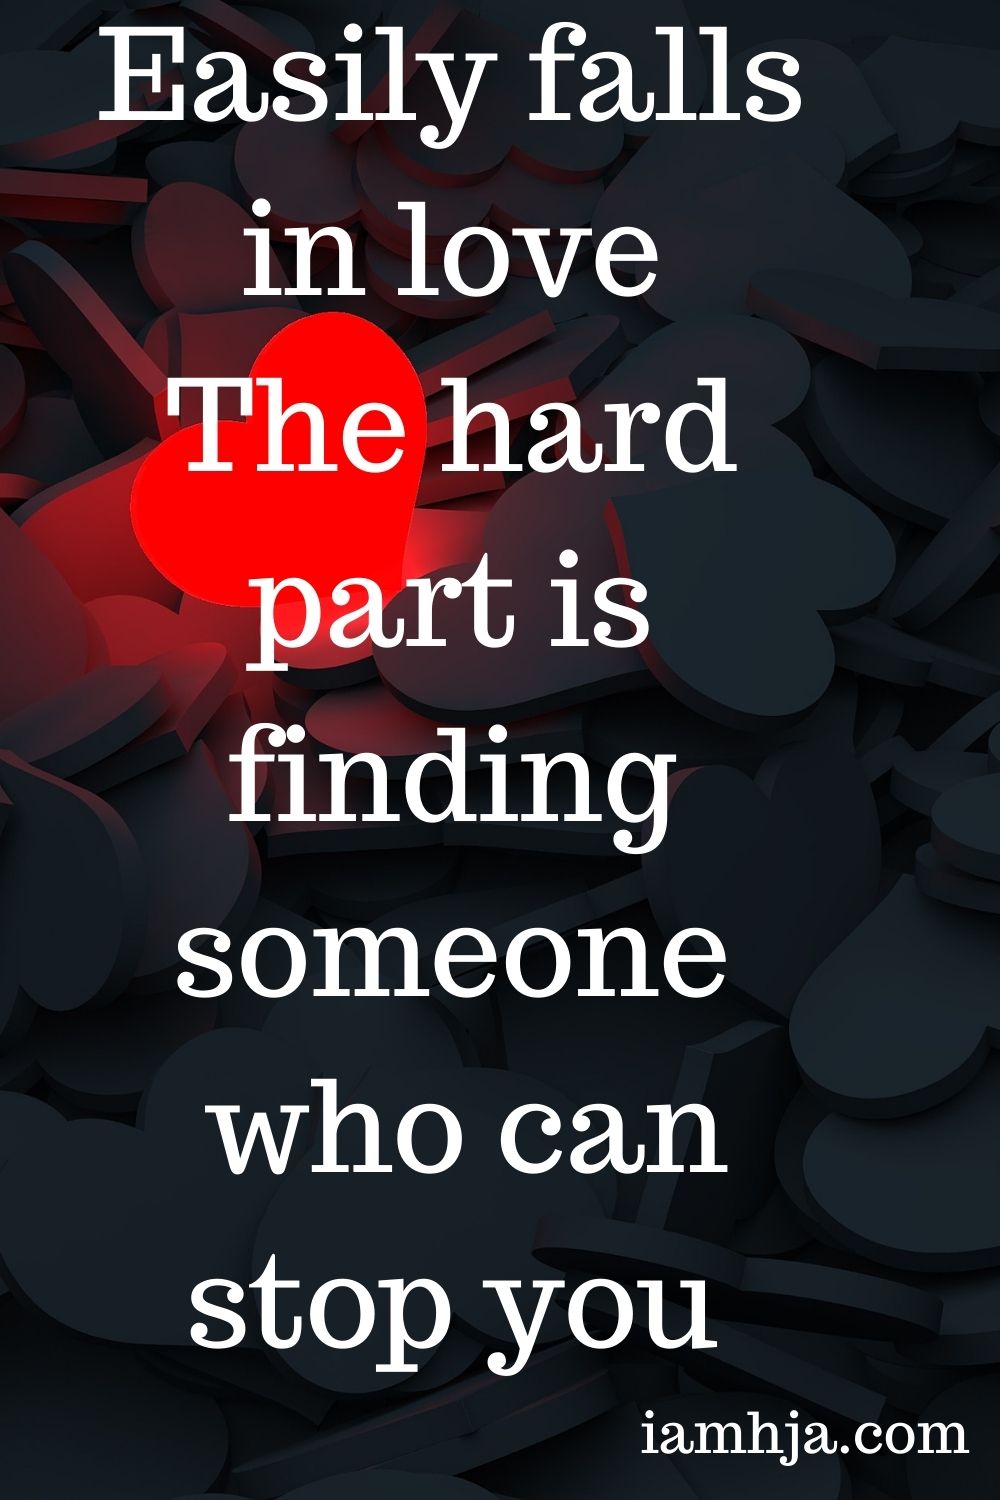 Easily falls in love The hard part is finding someone who can stop you.